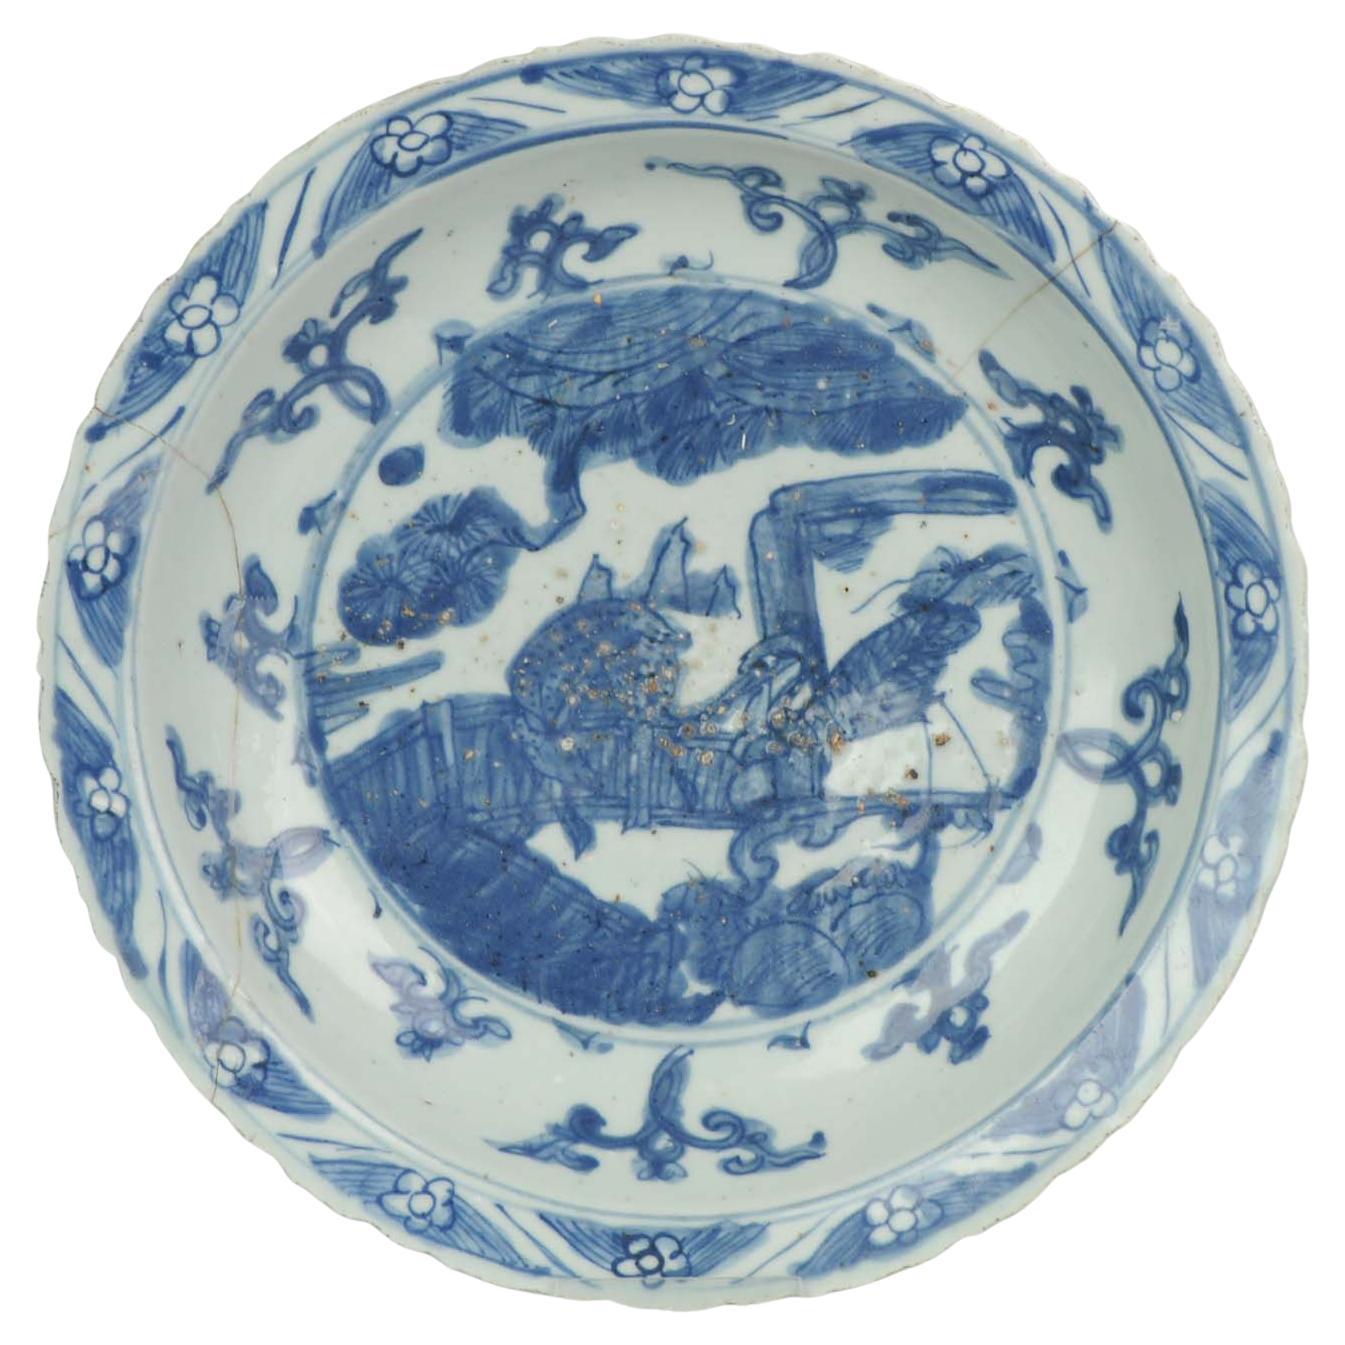 Period Chinese Porcelain Dish Charger Deer and Crane Antique Marked Ming, 16 C. im Angebot